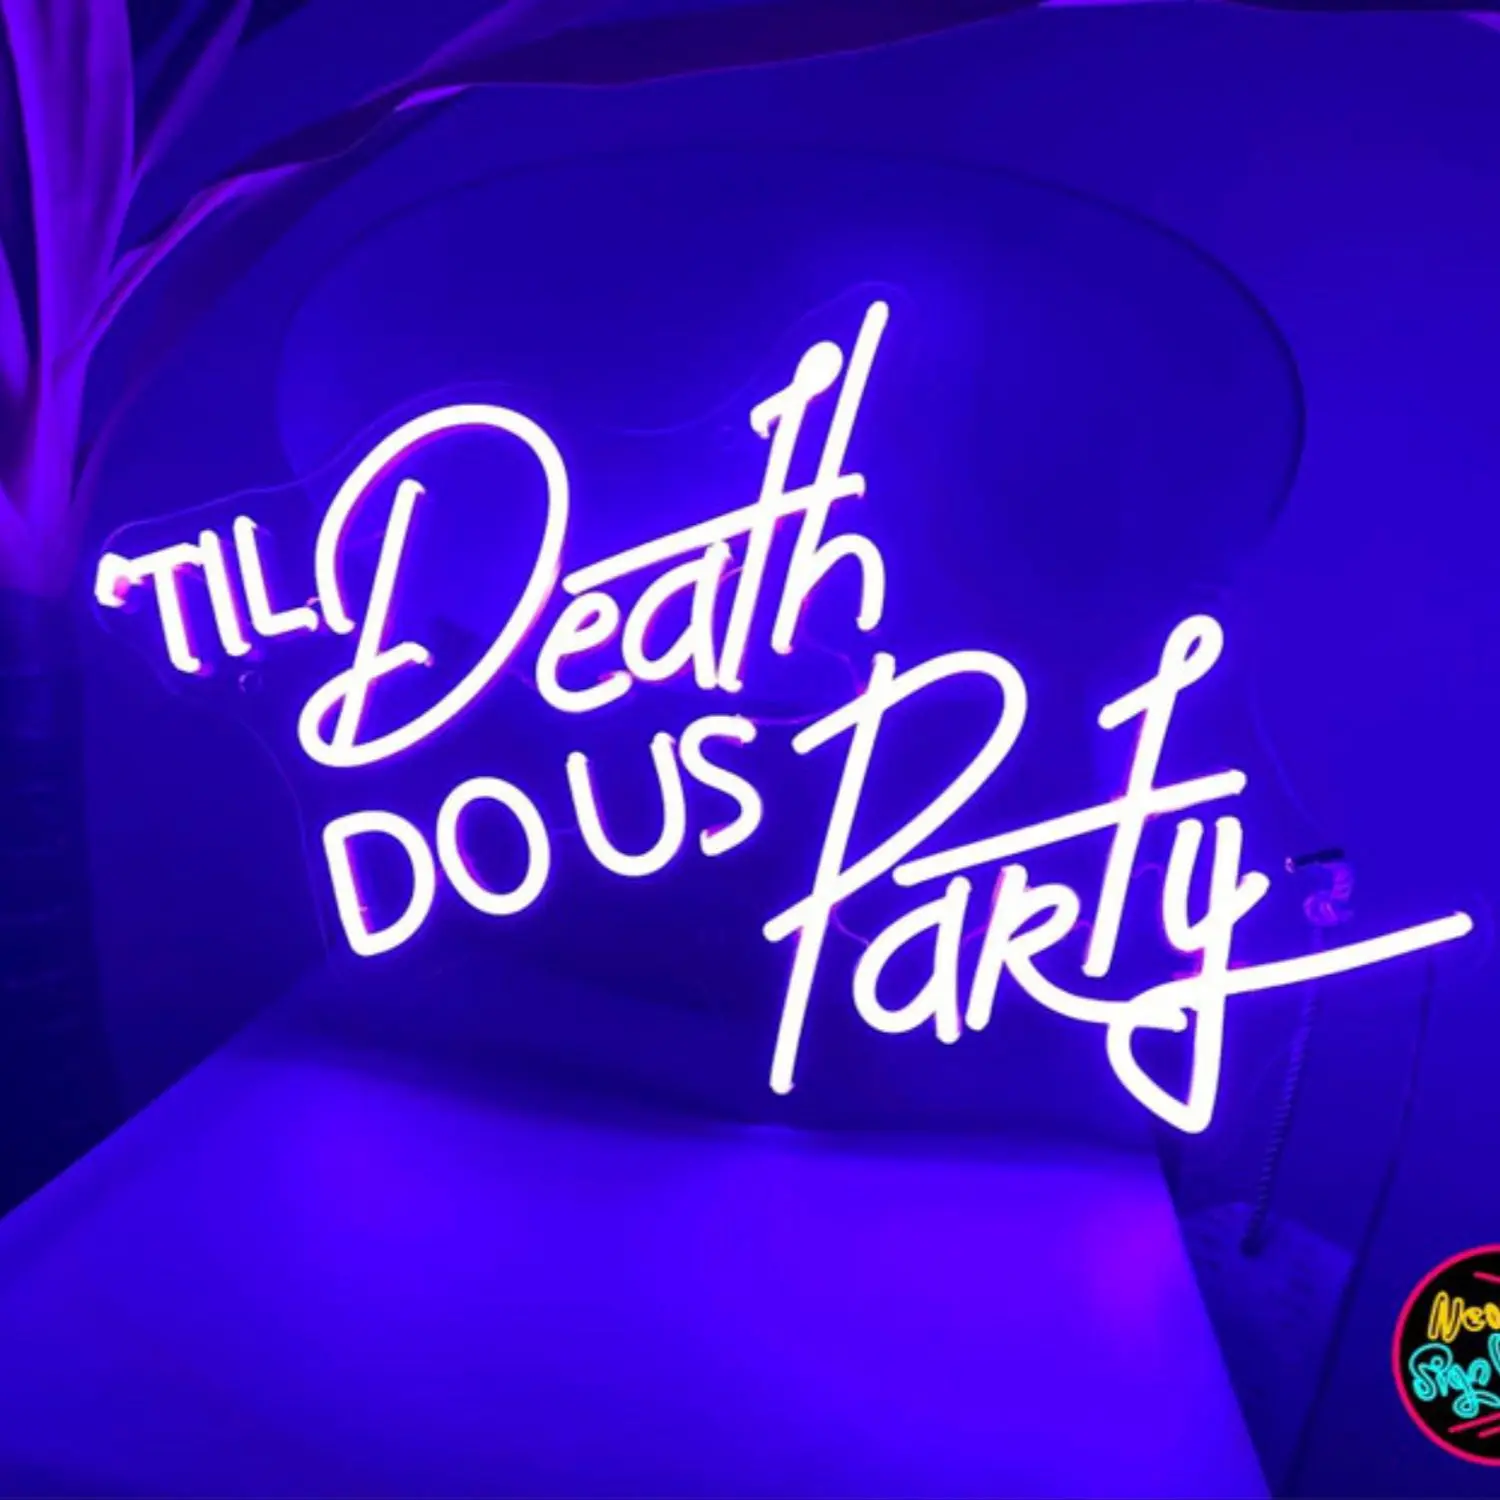 Enlarge Til Death Do Us Party Neon Sign,Neon Sign for Wedding,Wedding Neon Signs,Custom Neon Signs,Party Lights,Wedding Gifts, Christmas